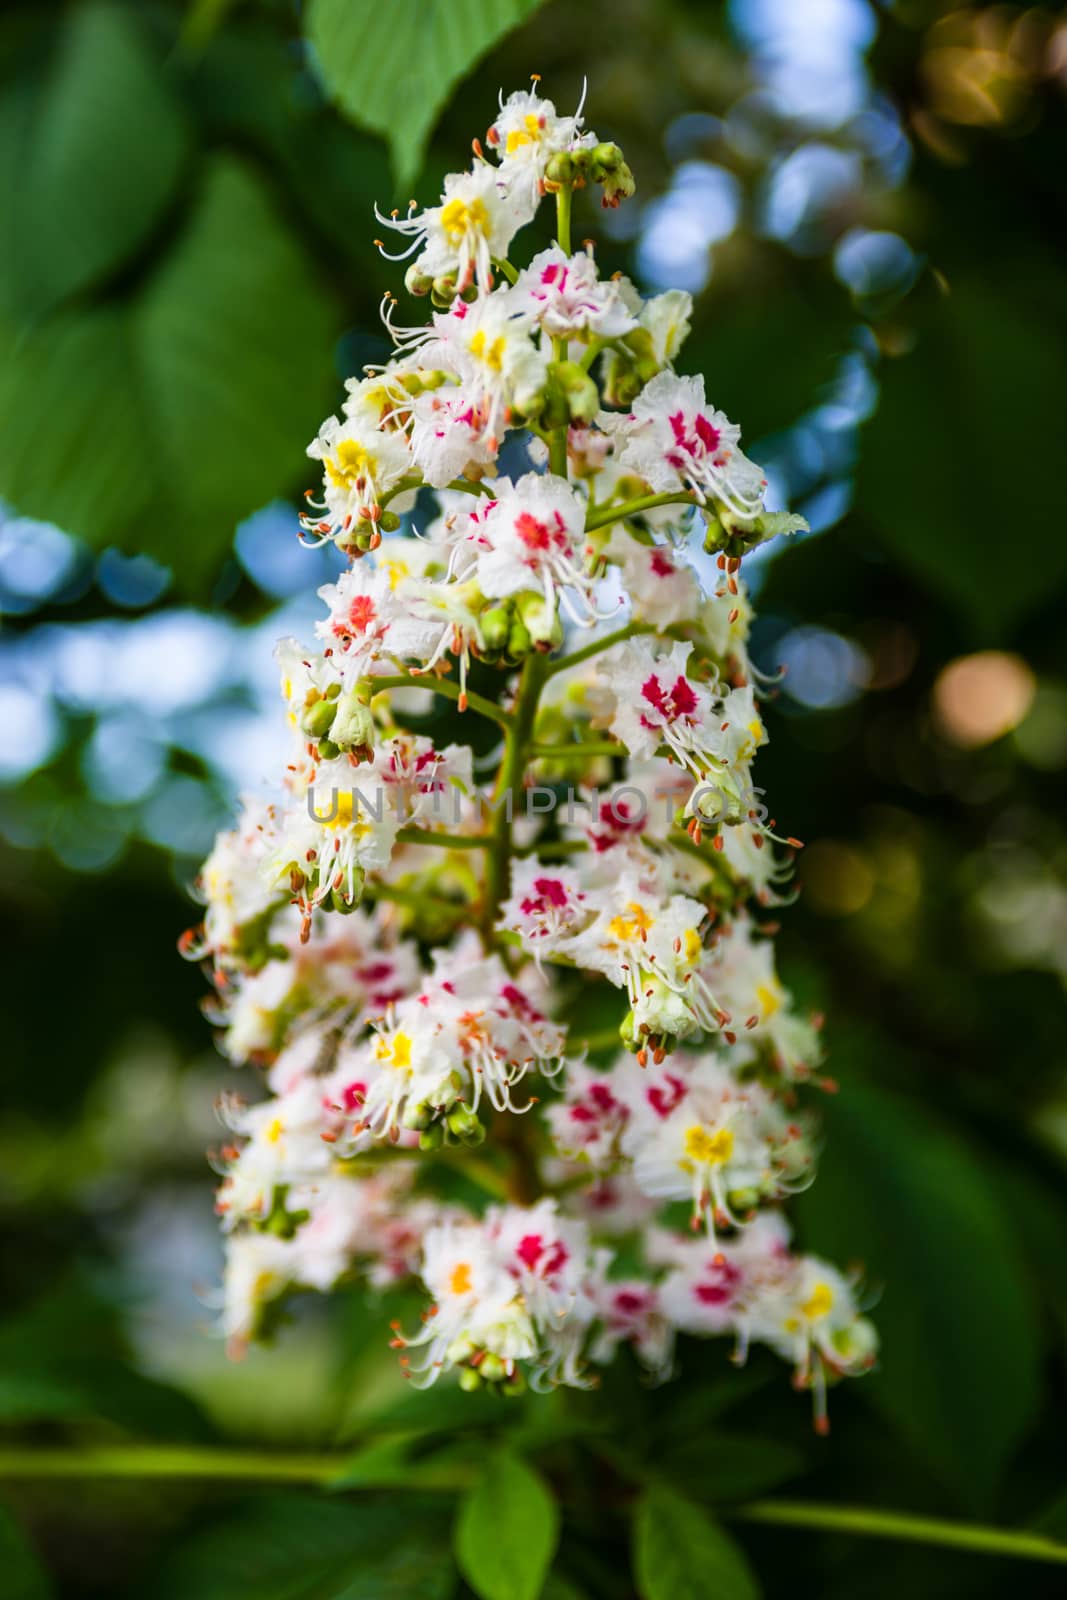 Bunch of white flowers of the horse-chestnut tree